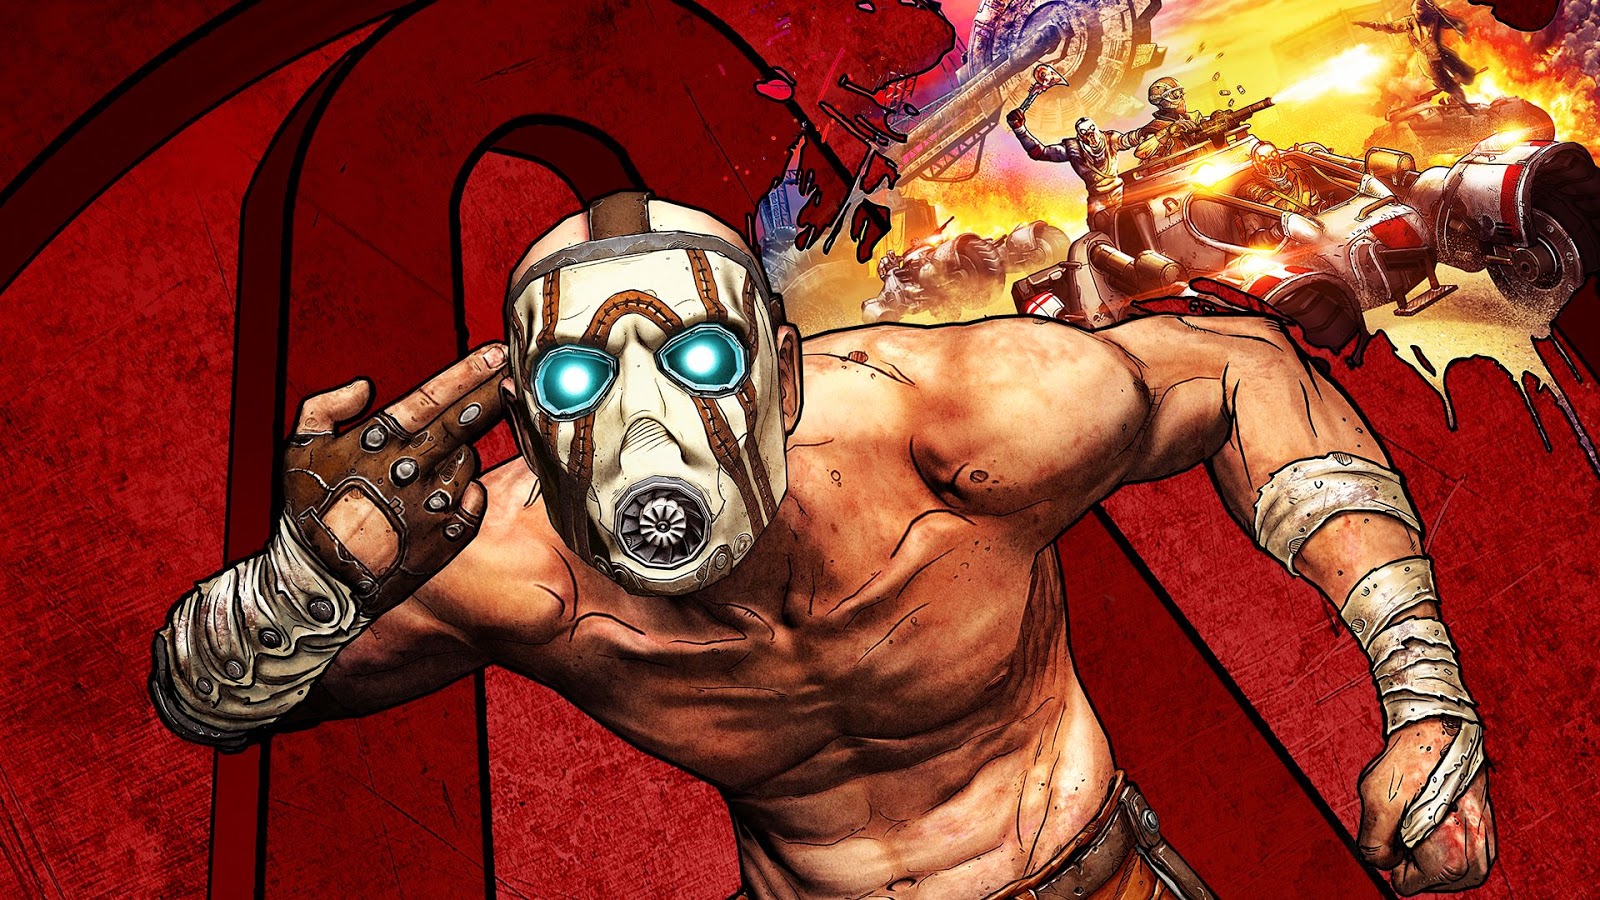 The one who resurrected Duke Nukem: interview with Randy Pitchford, magician from Gearbox - 2